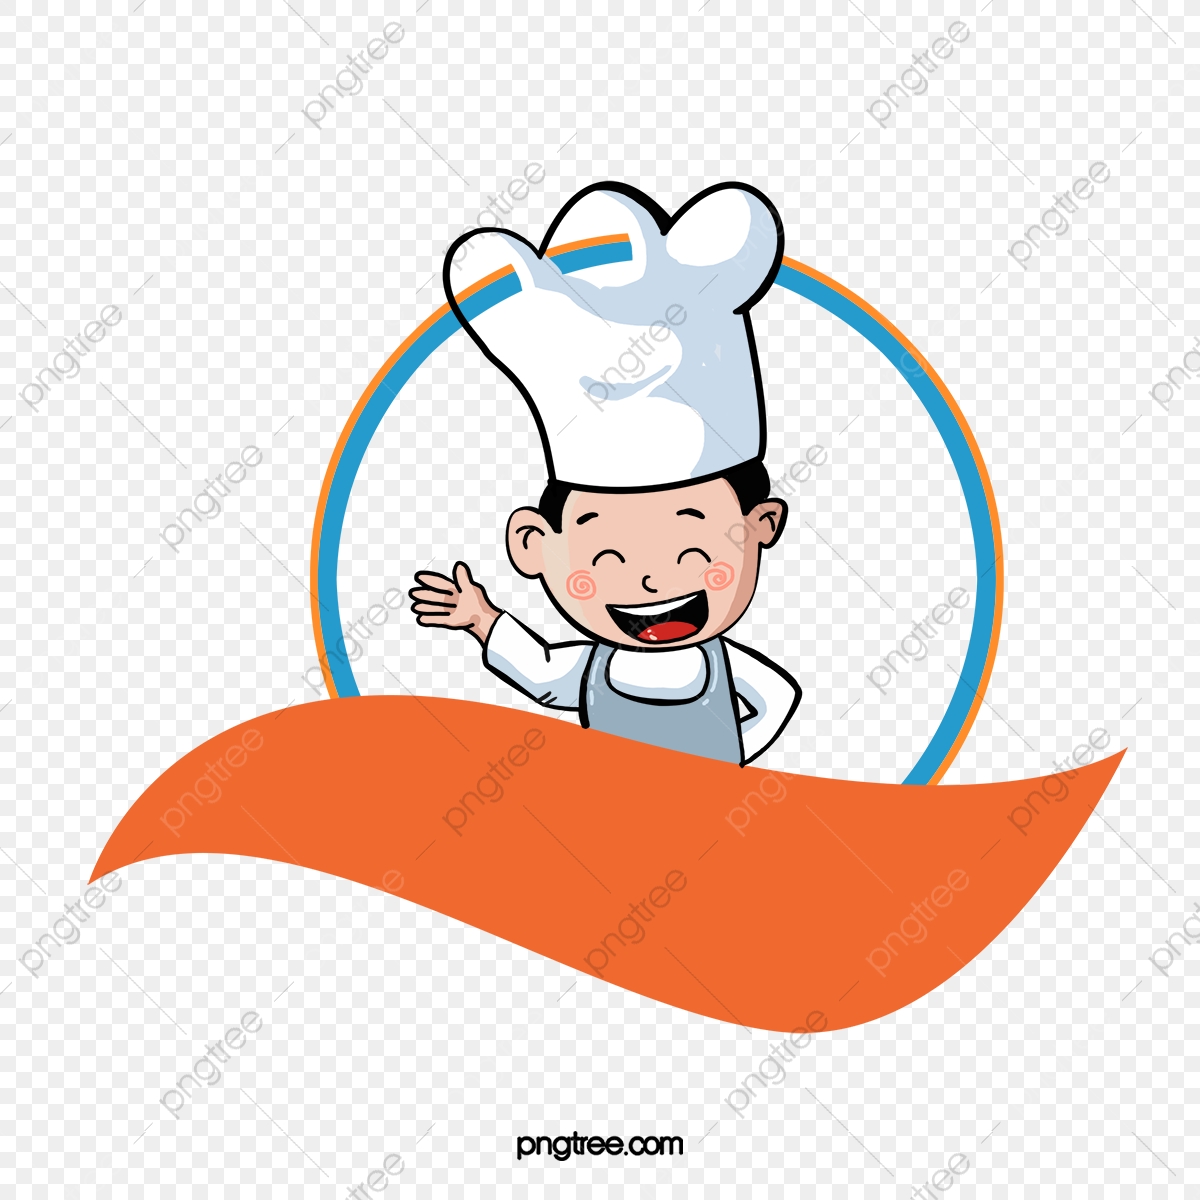 pngtree-chef-icon-png-image_3110375.jpg